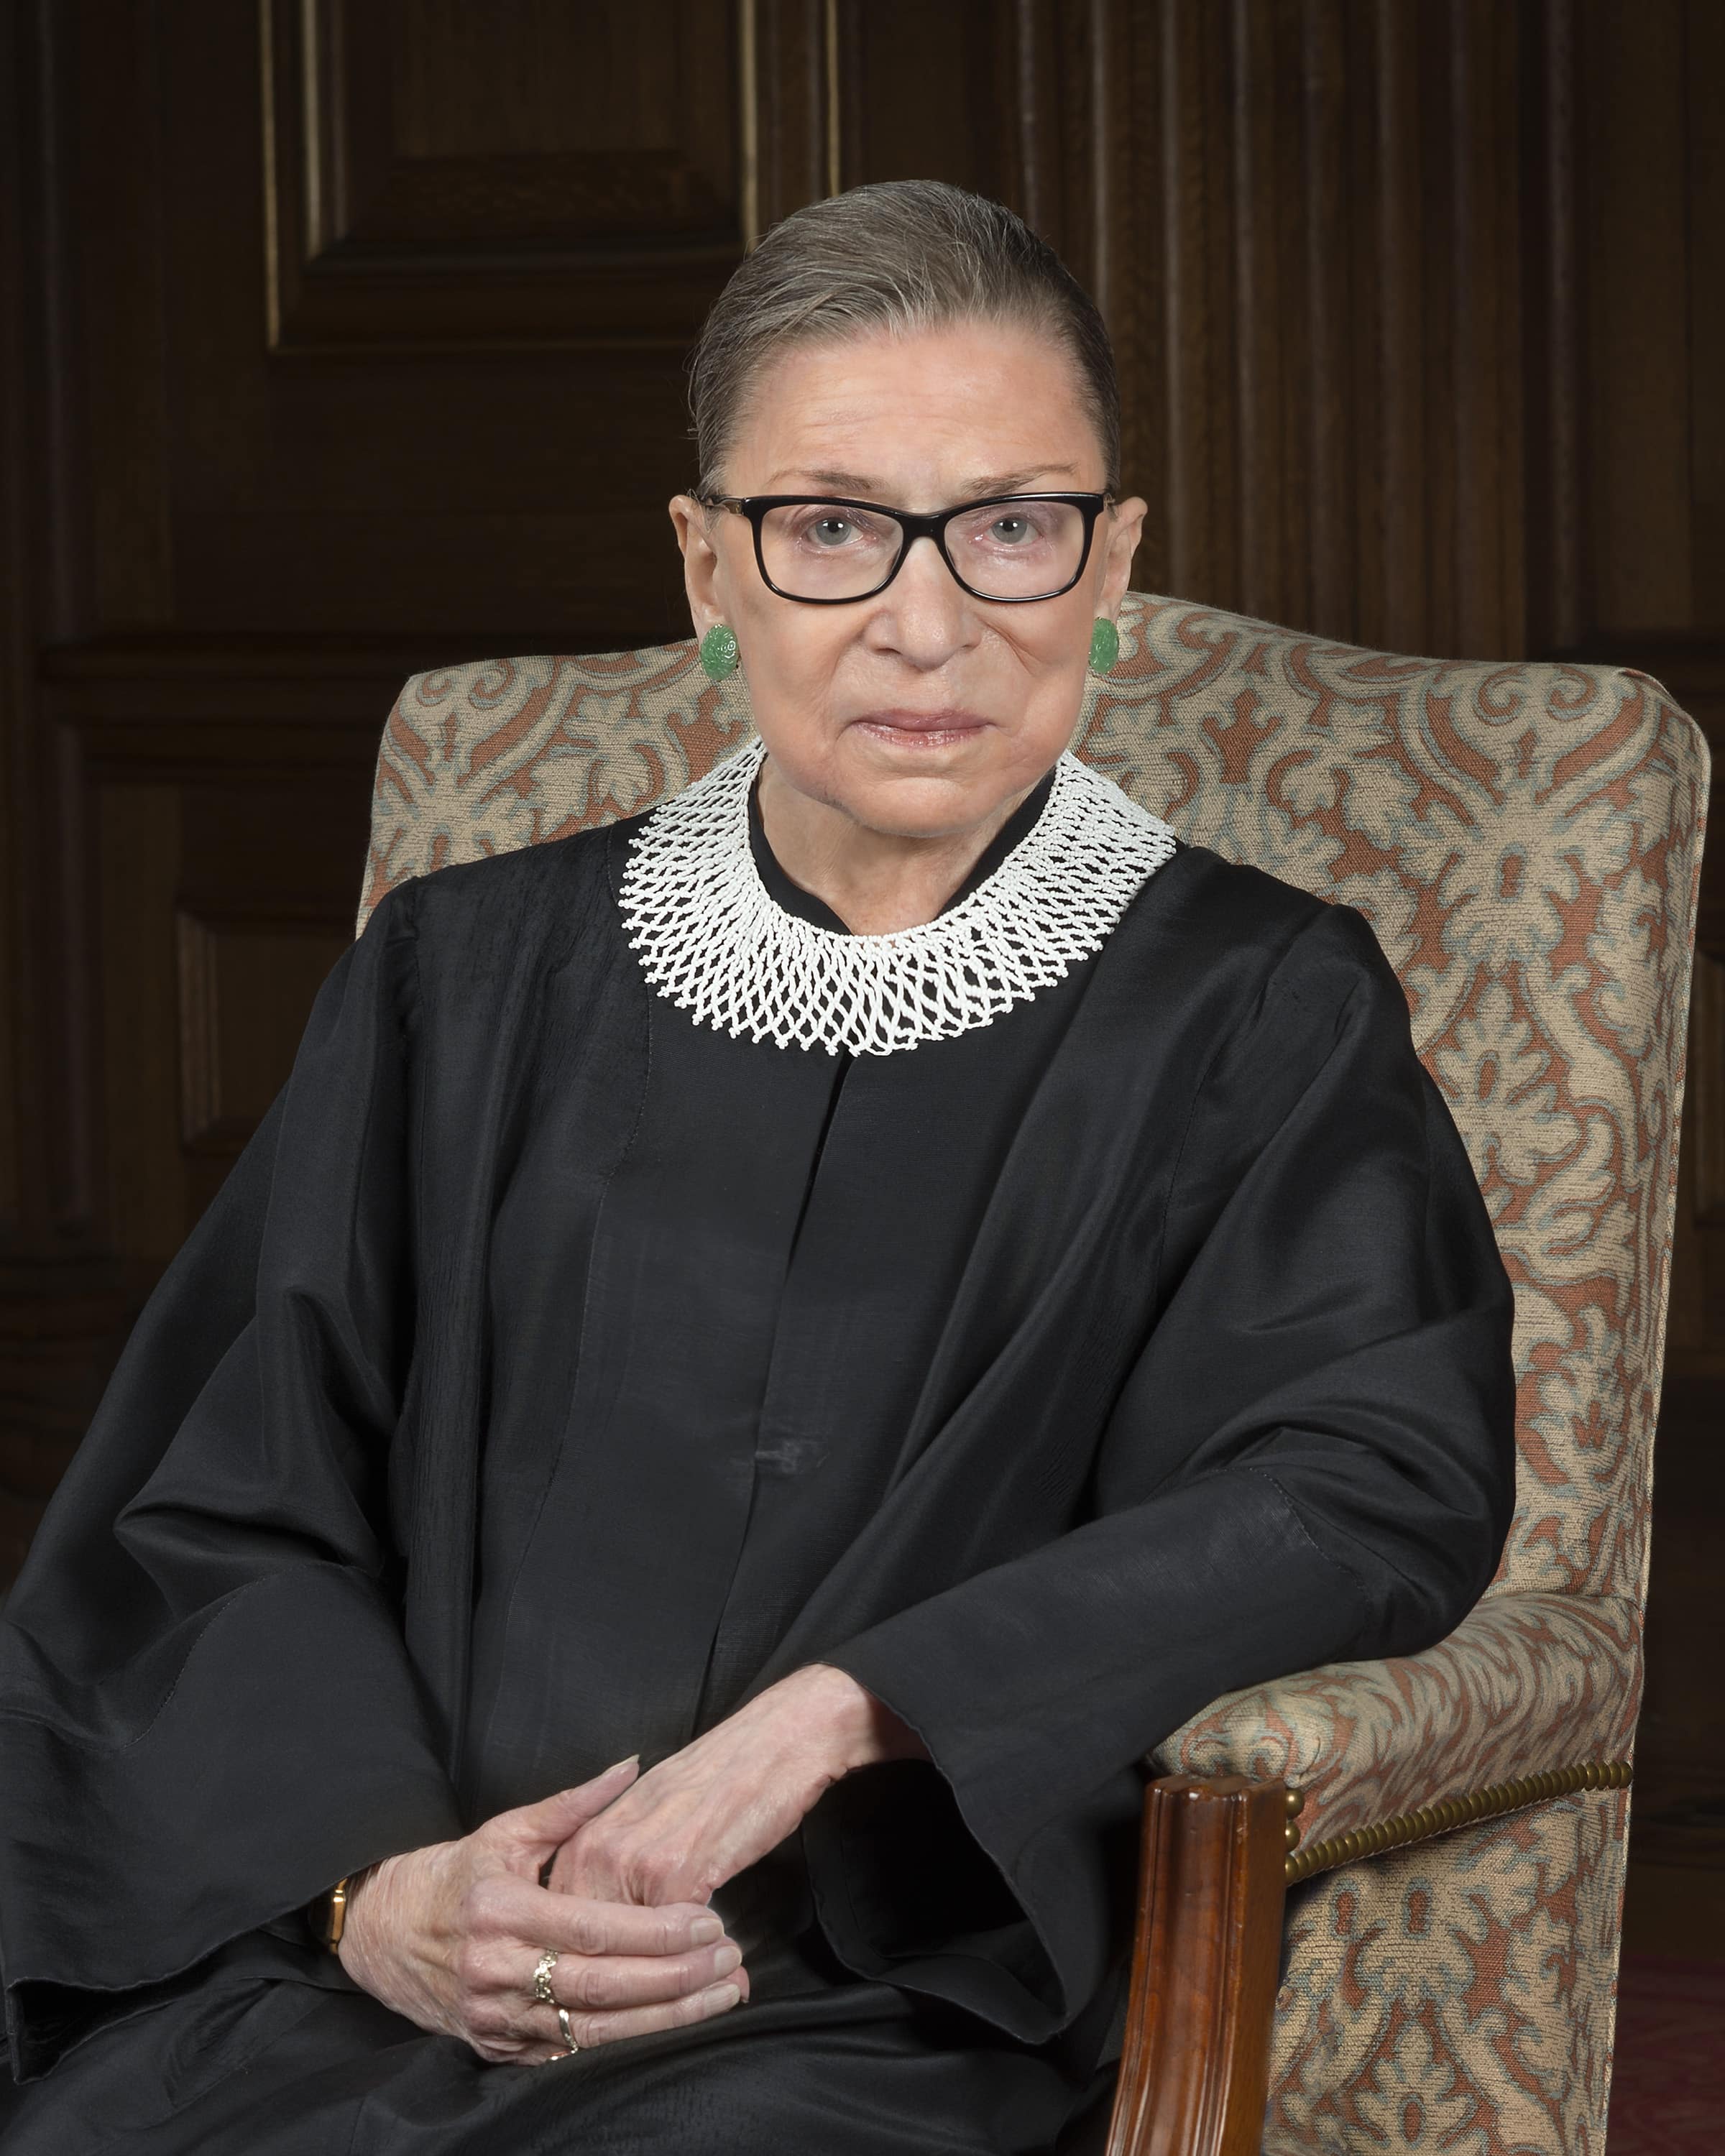 Ruth_Bader_Ginsburg_2016_portrait sitting in chair